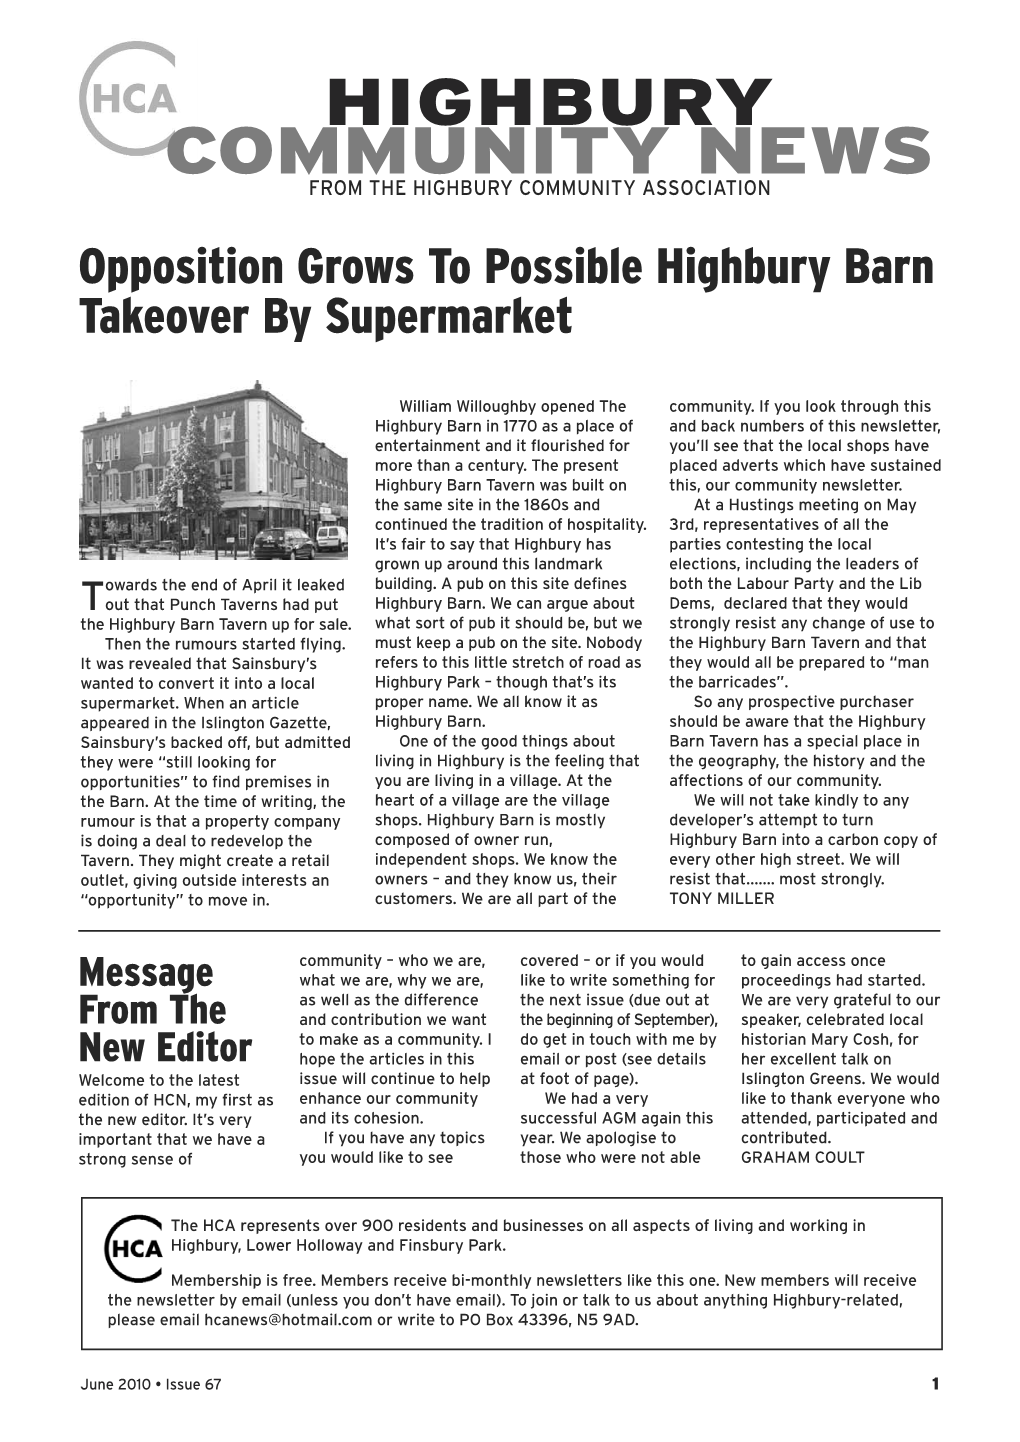 HIGHBURY COMMUNITY NEWS from the HIGHBURY COMMUNITY ASSOCIATION Opposition Grows to Possible Highbury Barn Takeover by Supermarket